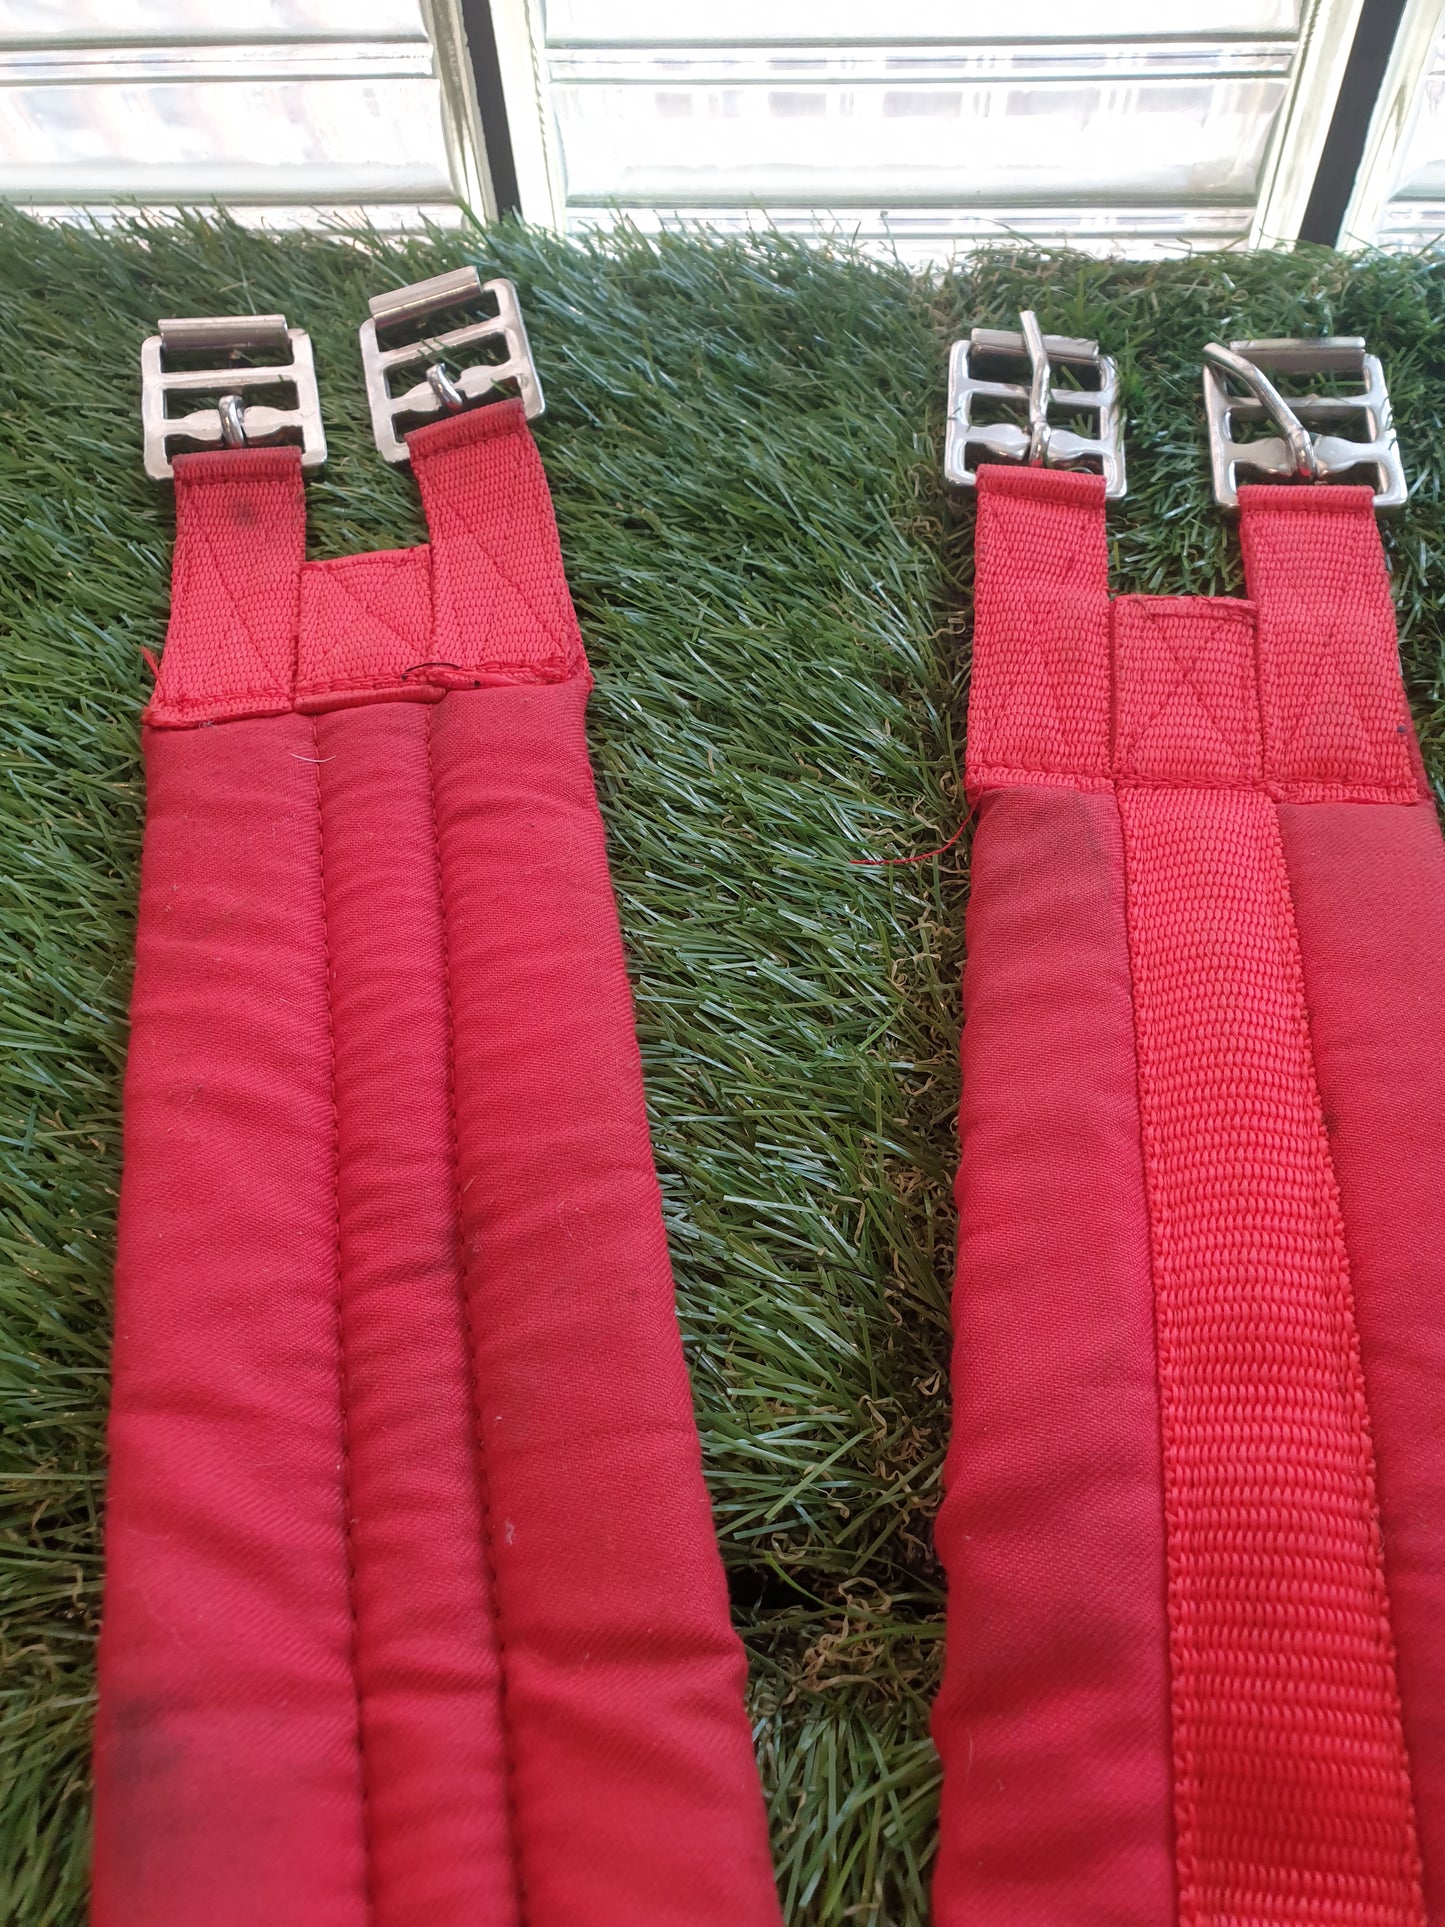 Red cotton girth 46" FREE POSTAGE  ❤